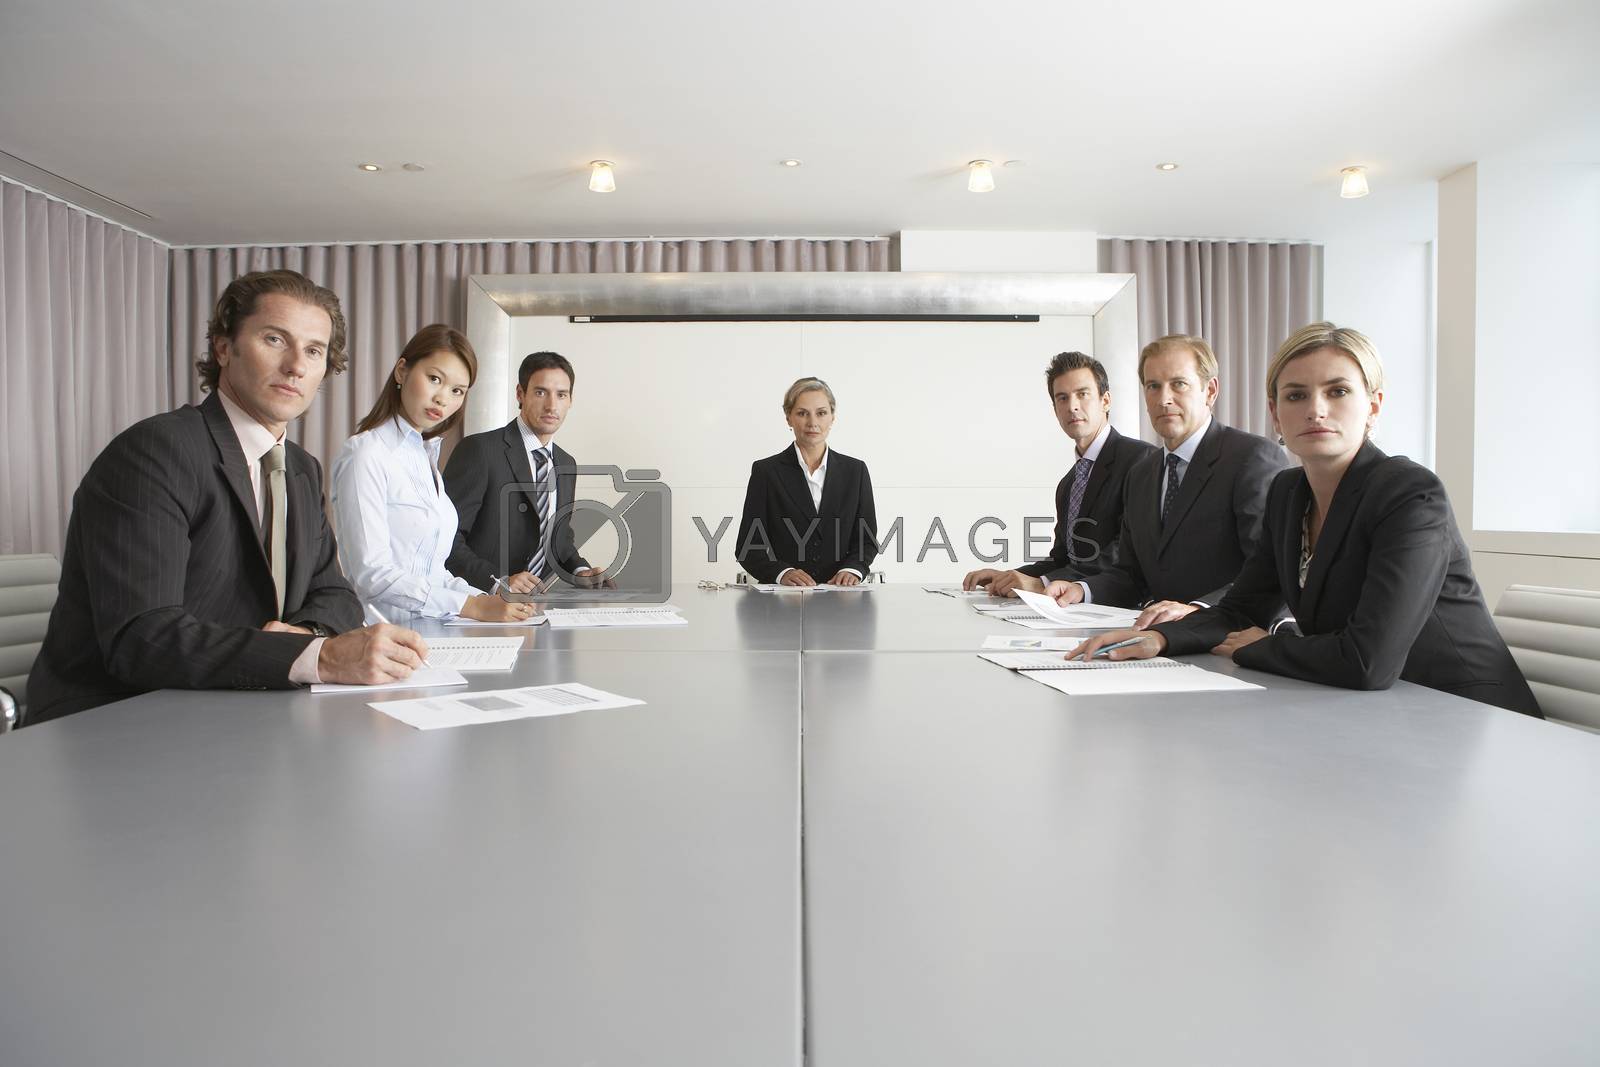 Royalty free image of Group of multiethnic business people at conference table by moodboard